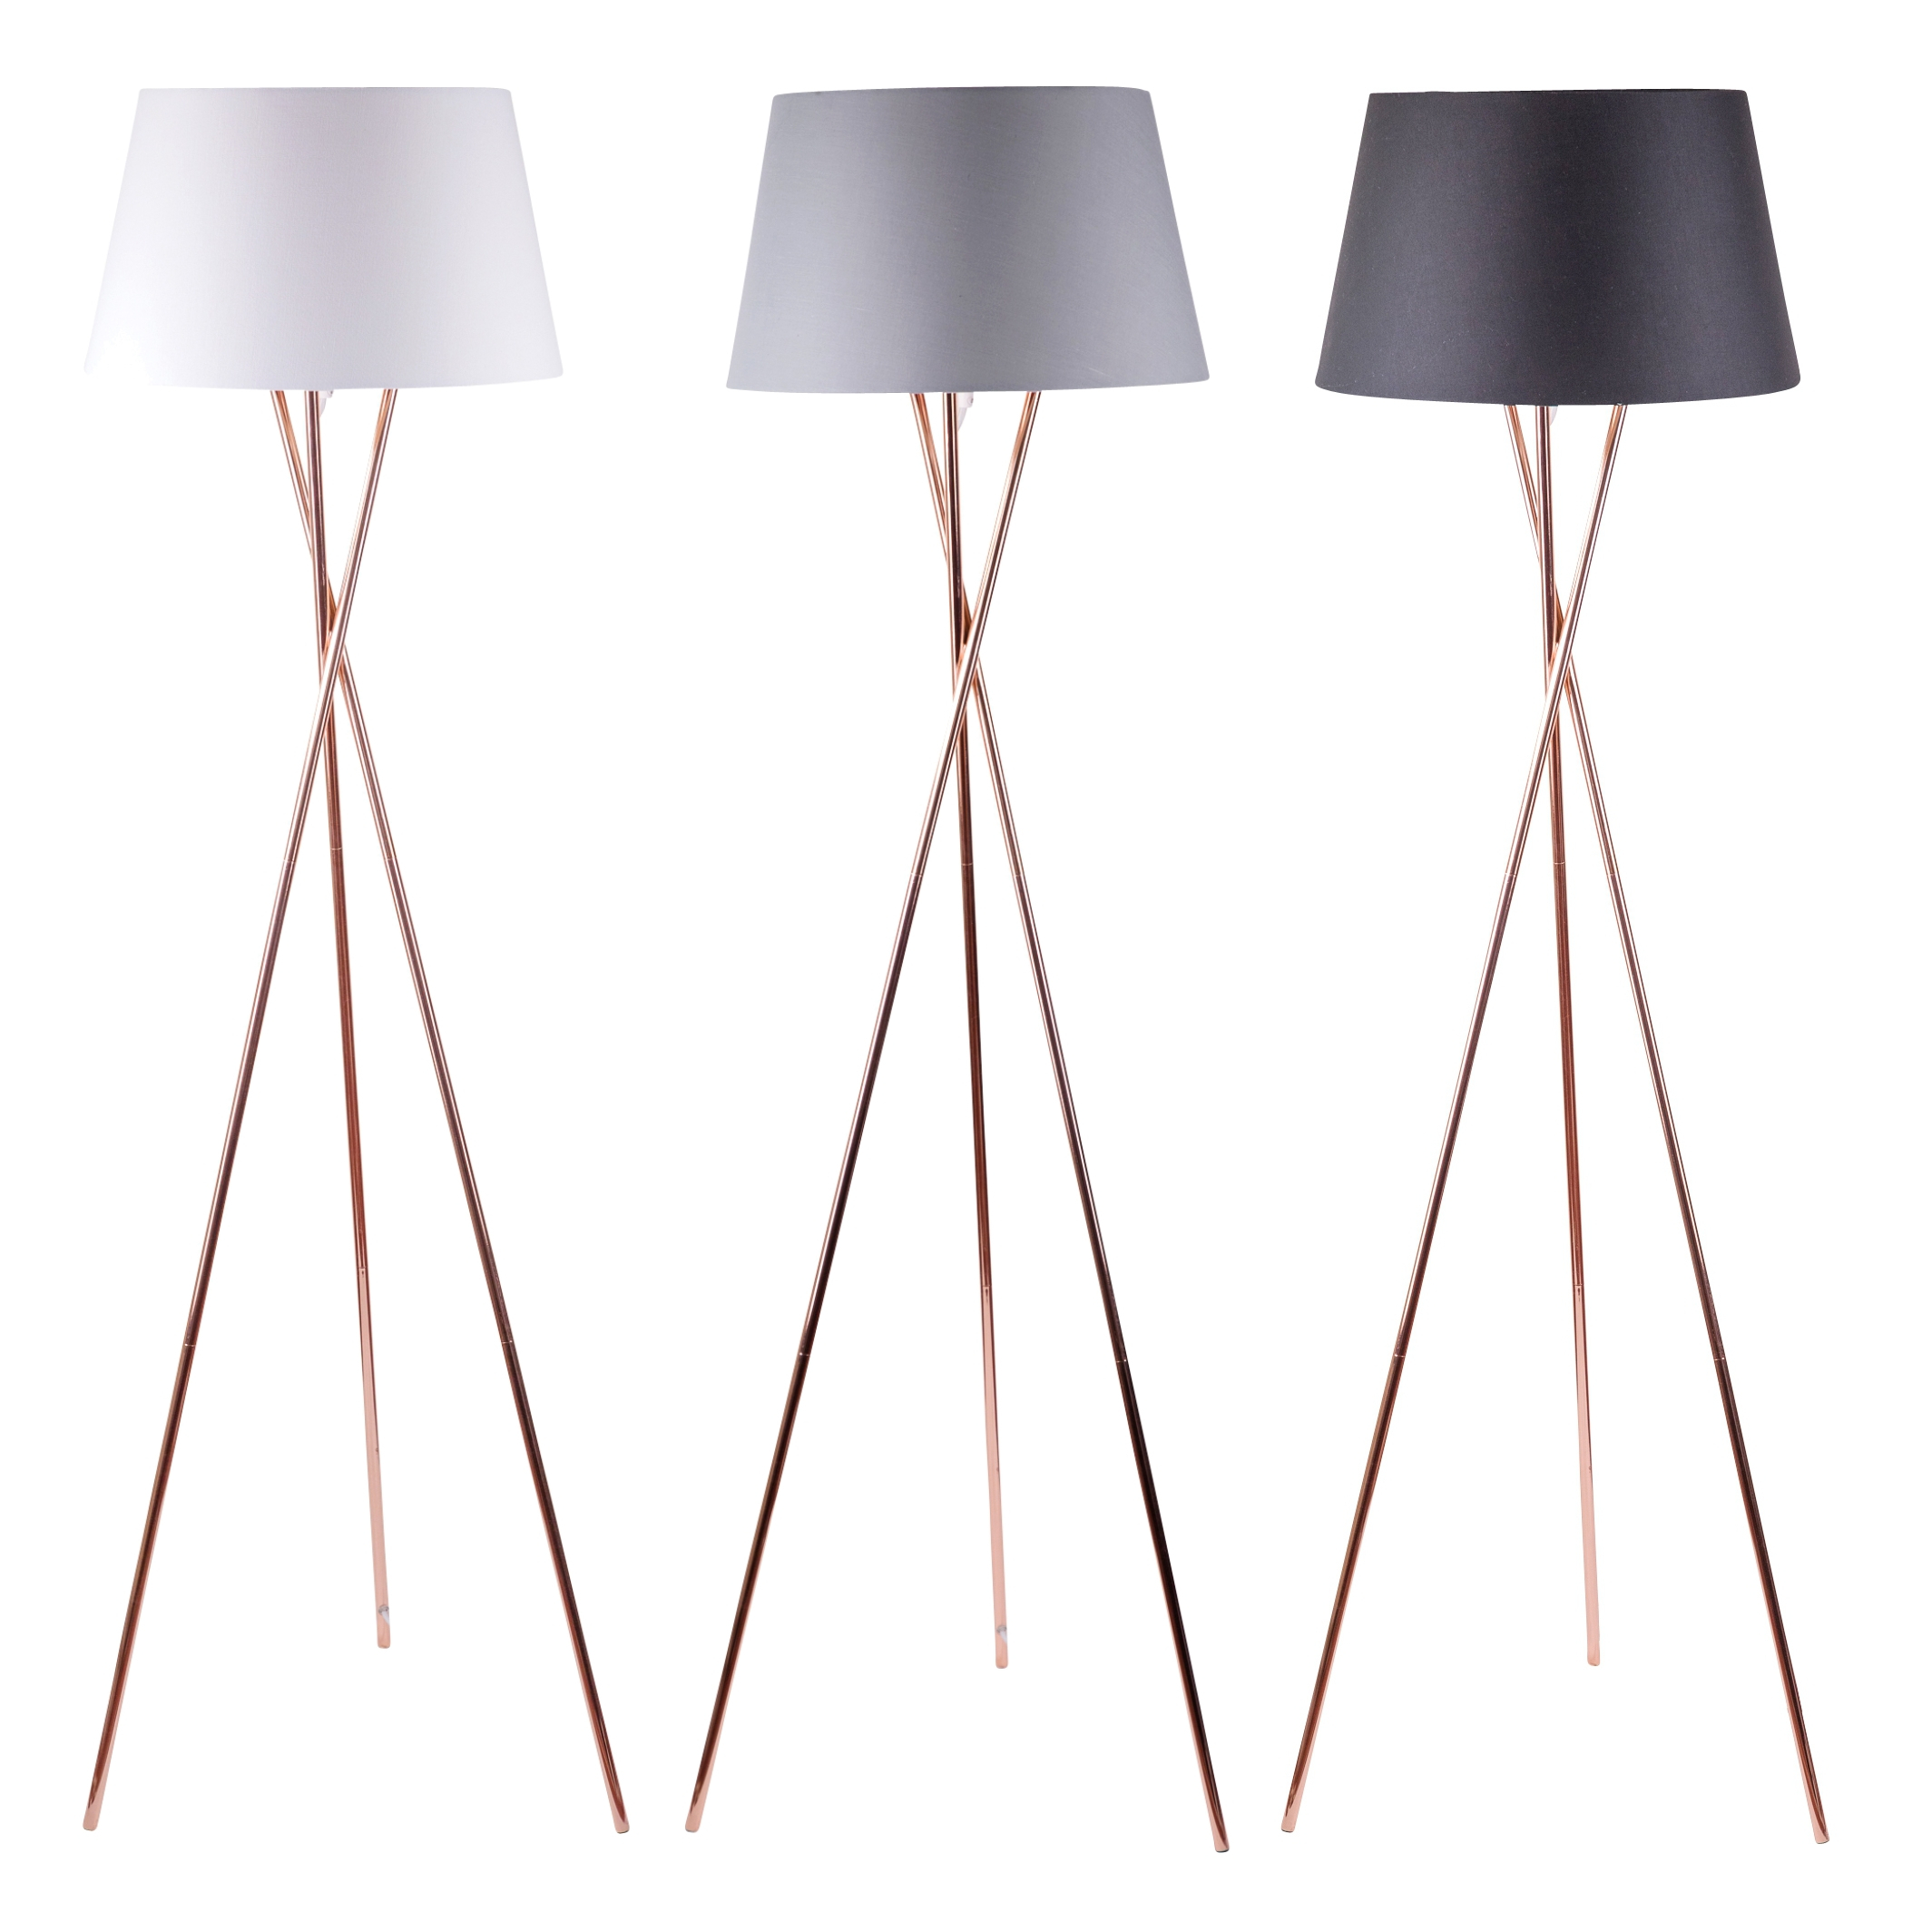 Details About Modern Copper Tripod Floor Lamp Standard Light With Grey White Or Black Shade with measurements 2129 X 2129